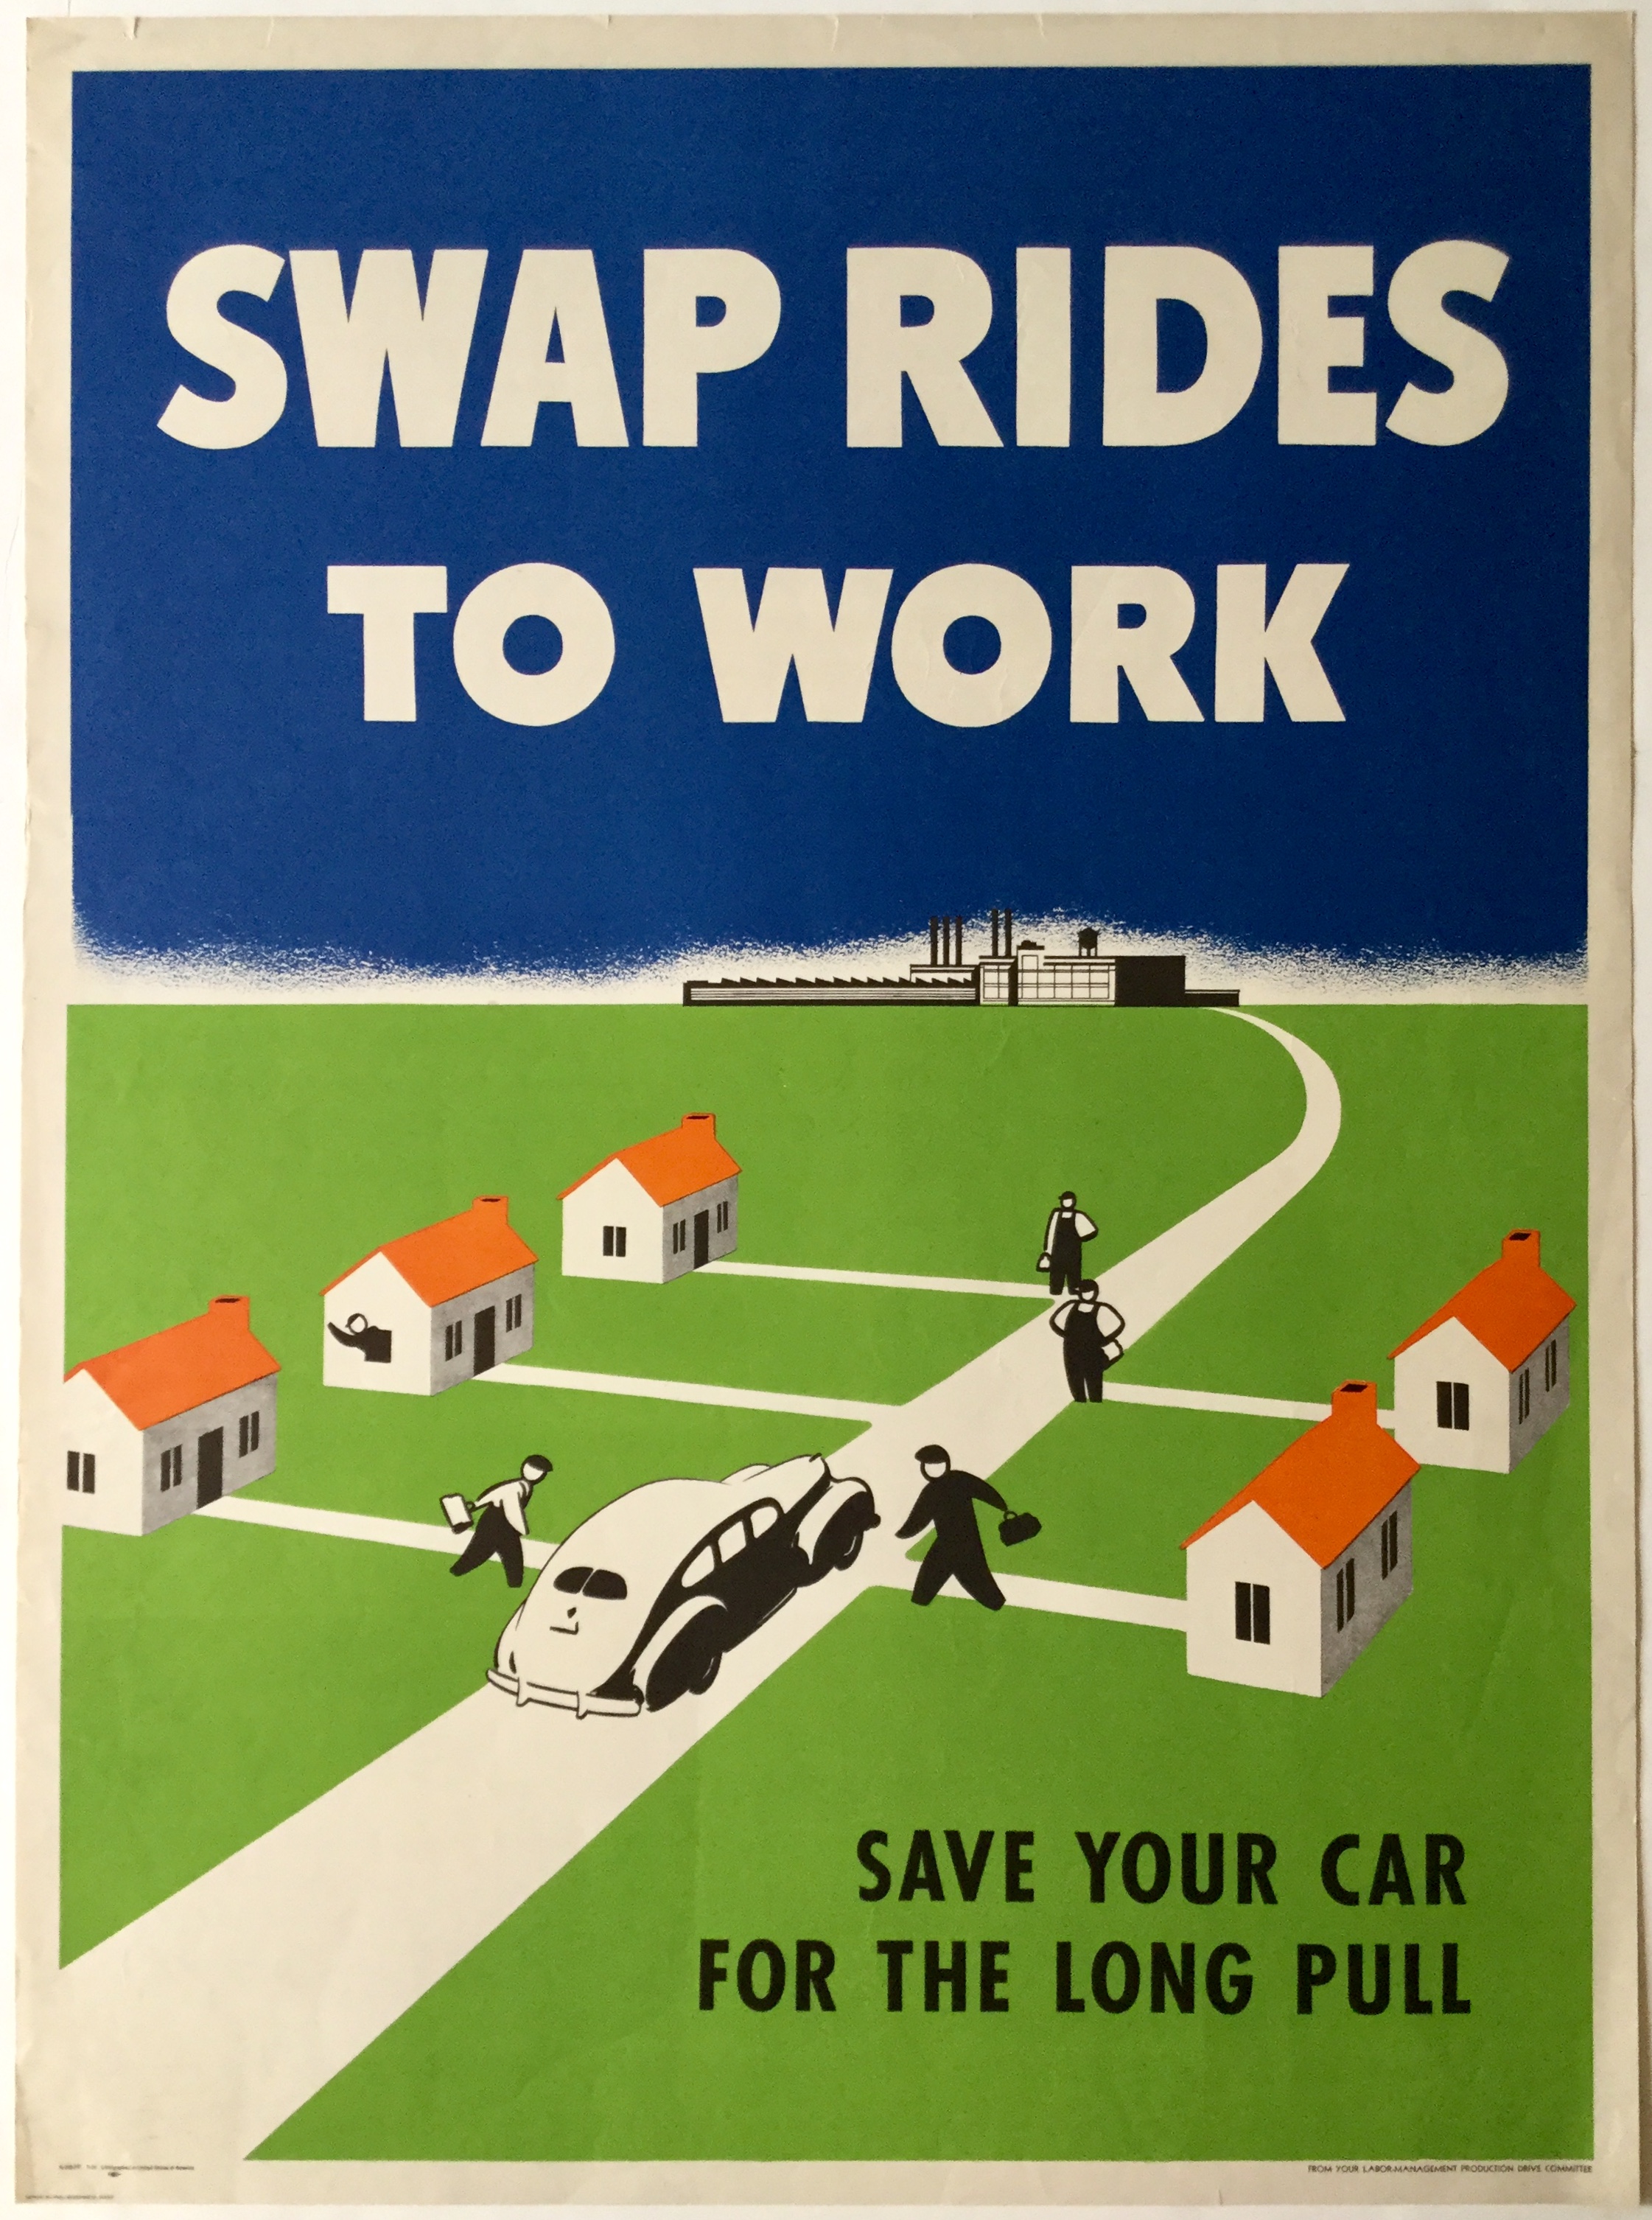 PB2415 SWAP RIDES TO WORK - SAVE YOUR CAR FOR THE LONG HAUL